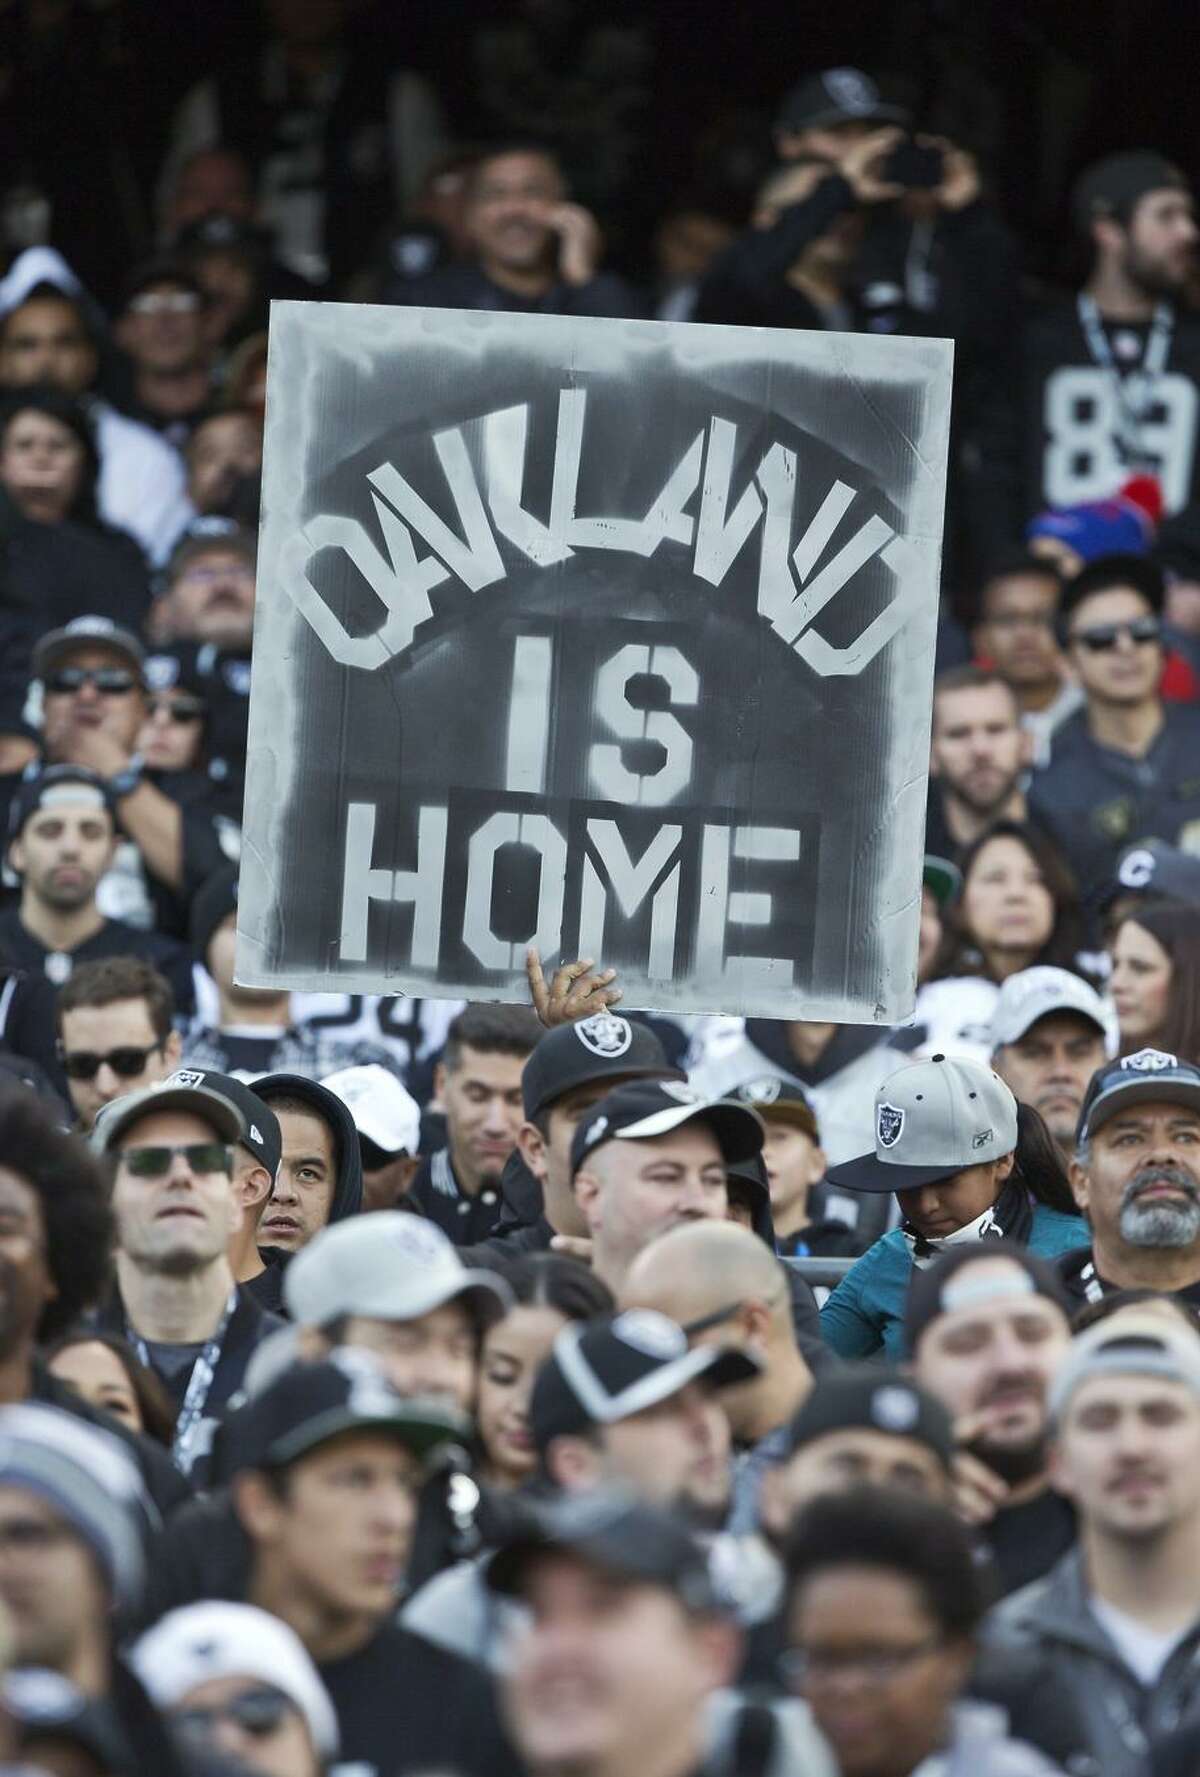 OAKLAND, CA - DECEMBER 4: Fans cheer on the Oakland Raiders against the Buffalo Bills on December 4, 2016 at Oakland-Alameda County Coliseum in Oakland, California. The Raiders won 38-24. (Photo by Brian Bahr/Getty Images) *** Local Caption ***